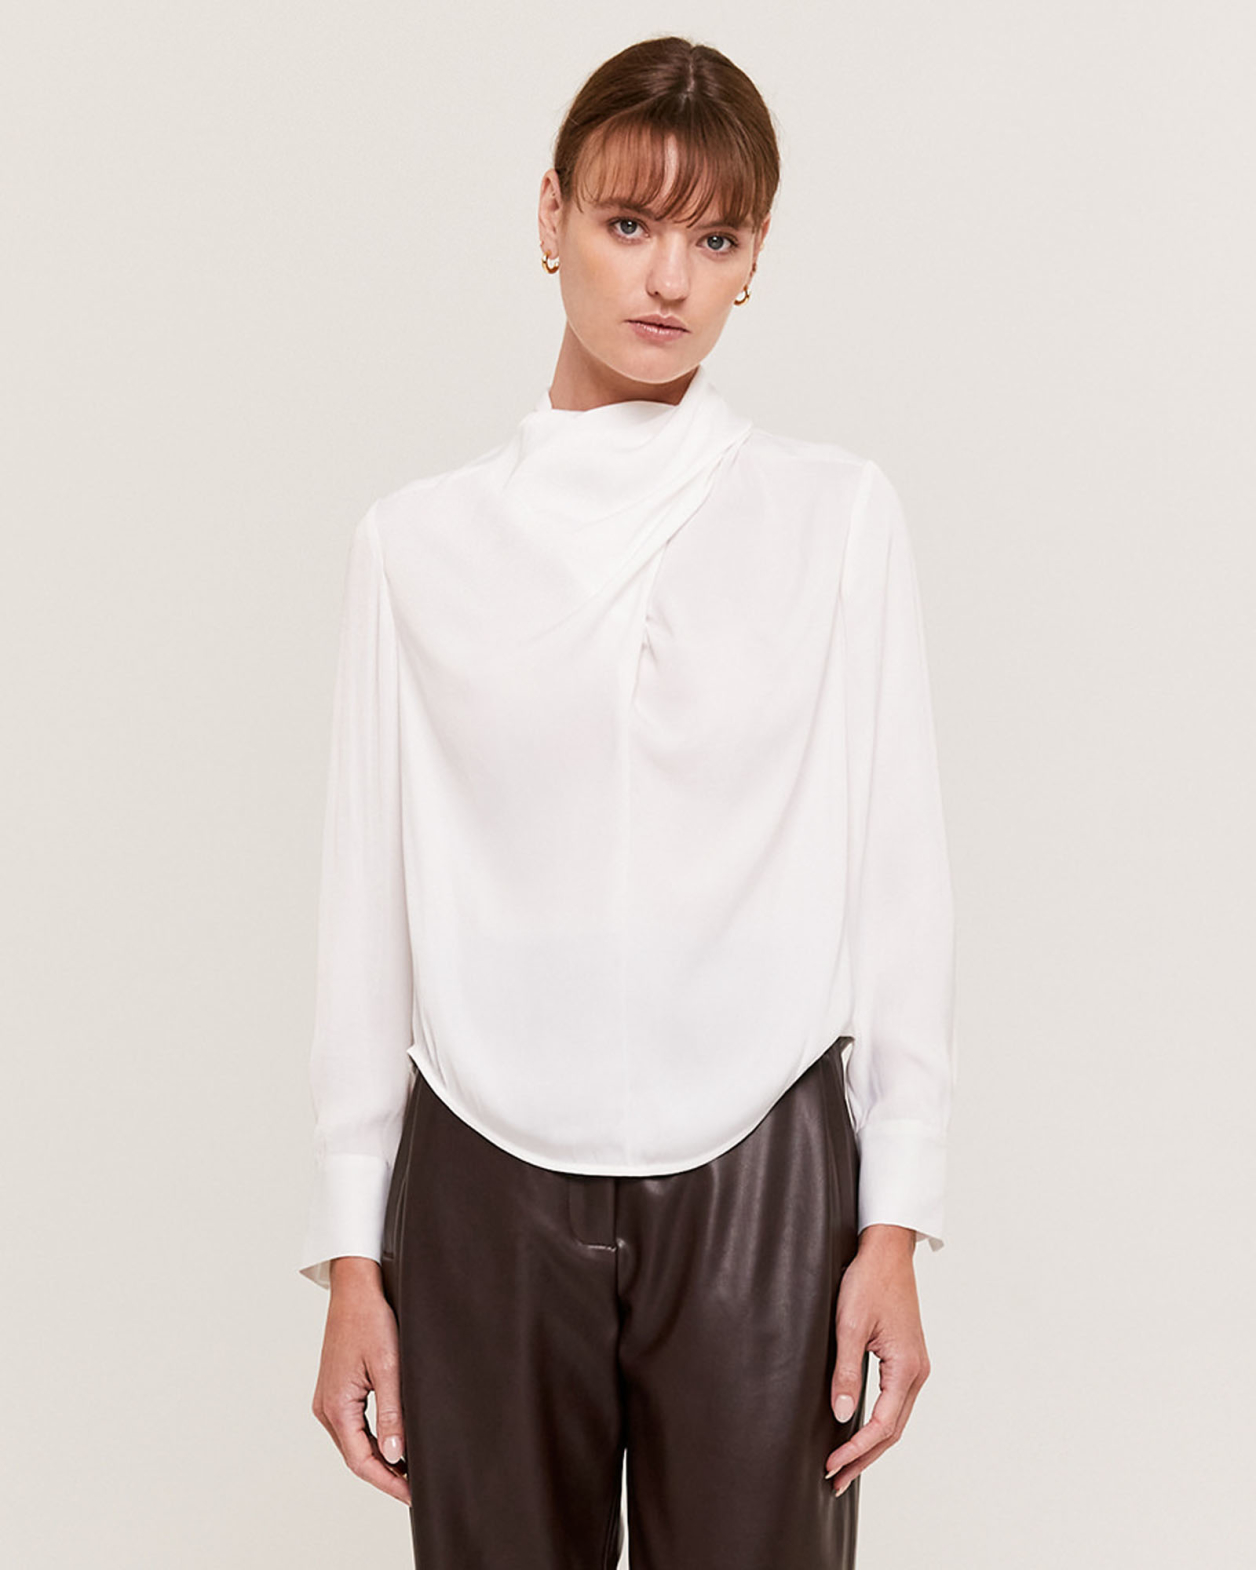 Lillian Mixed Media Draped Neck Top in OFF WHITE